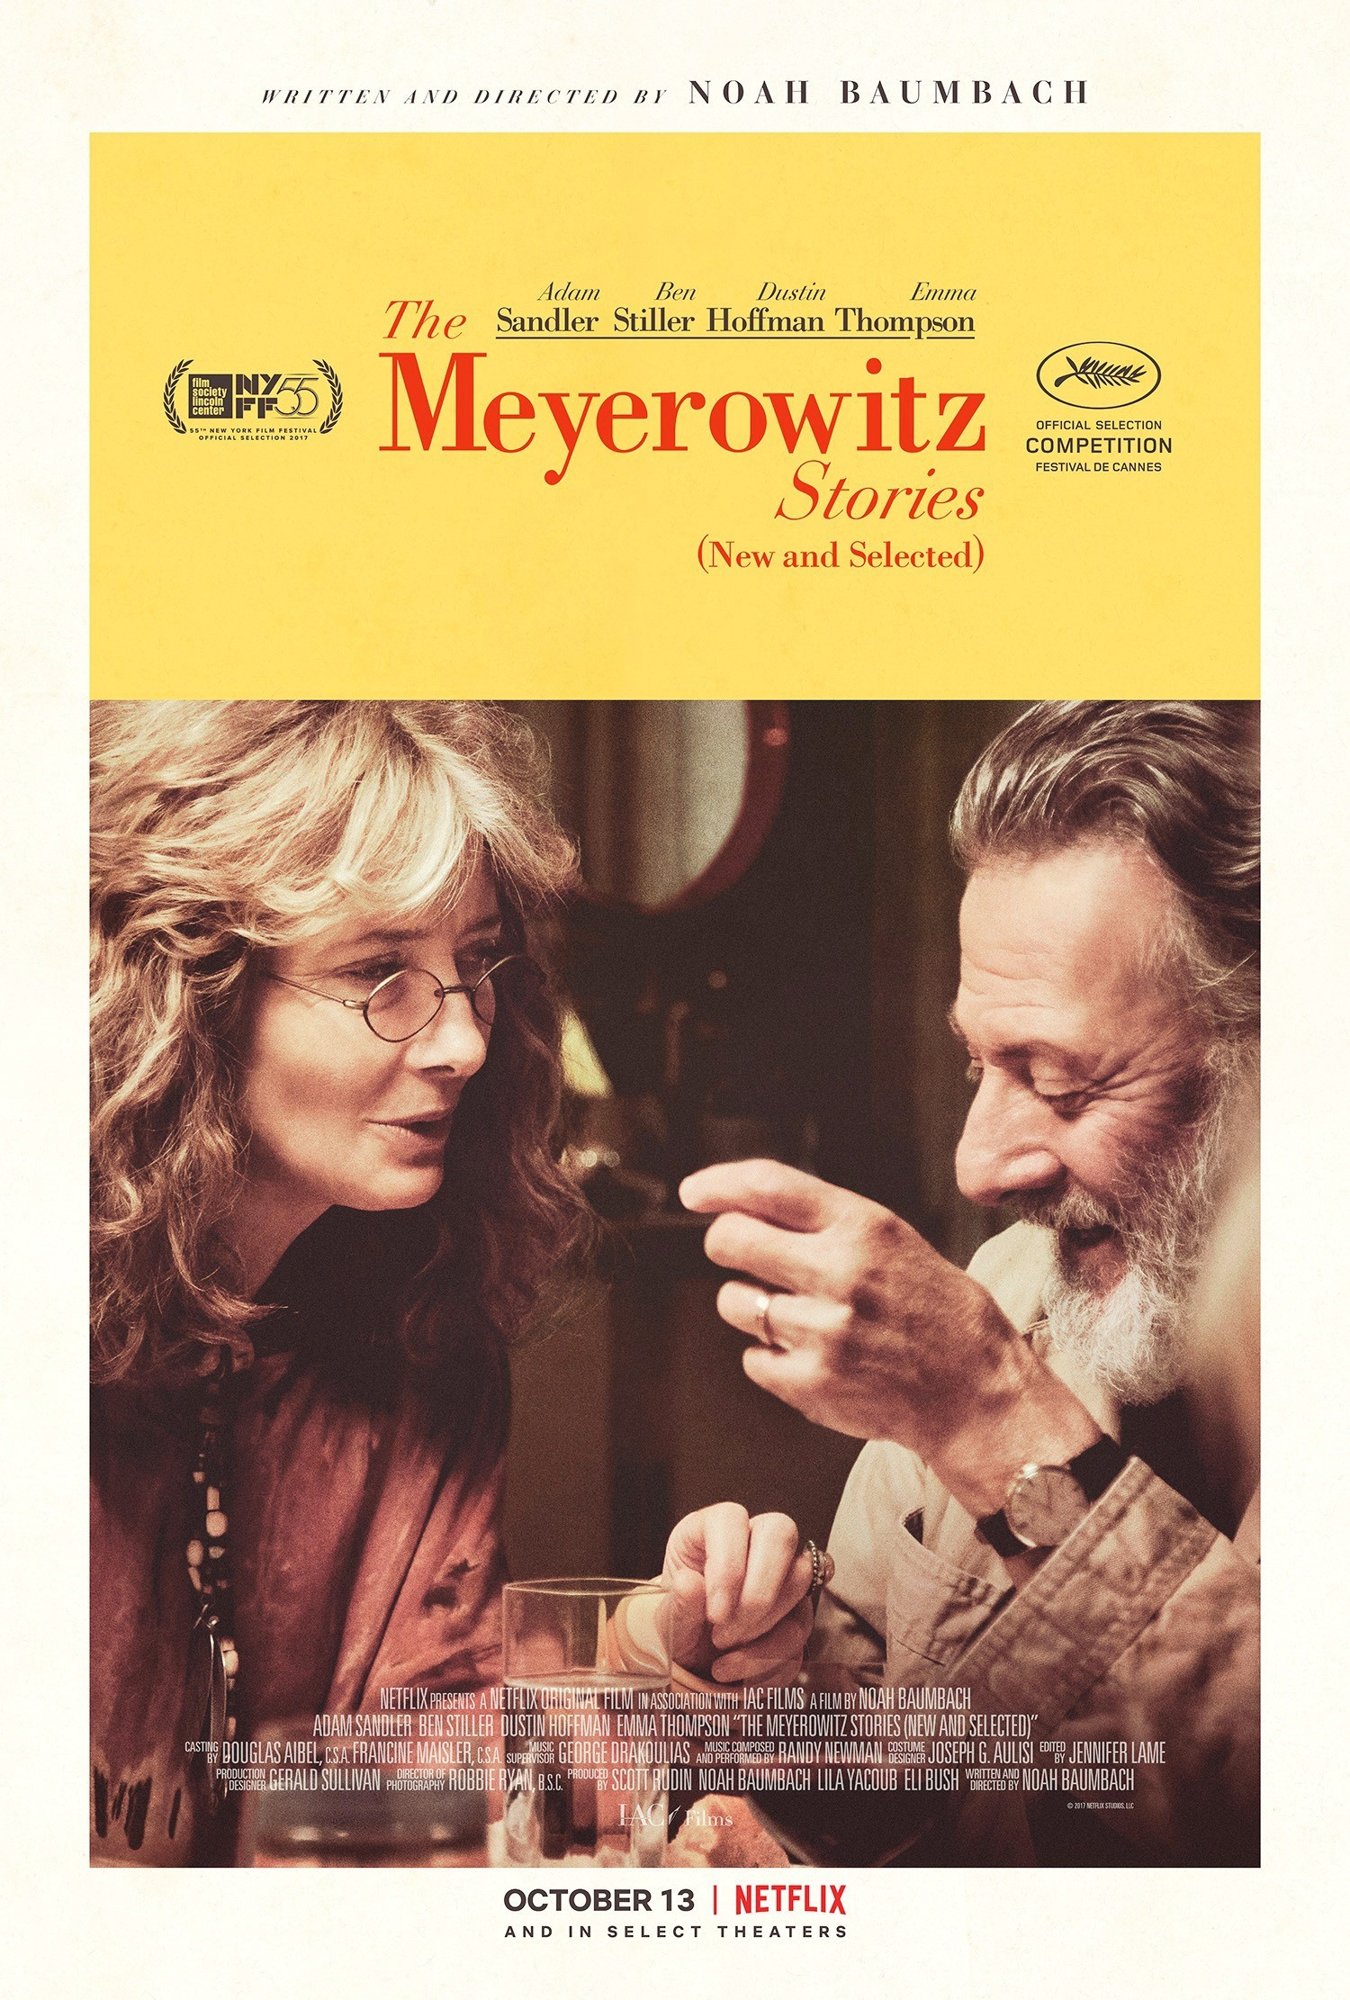 The Meyerowitz Stories (2017) Pictures, Trailer, Reviews, News, DVD and Soundtrack1350 x 2000